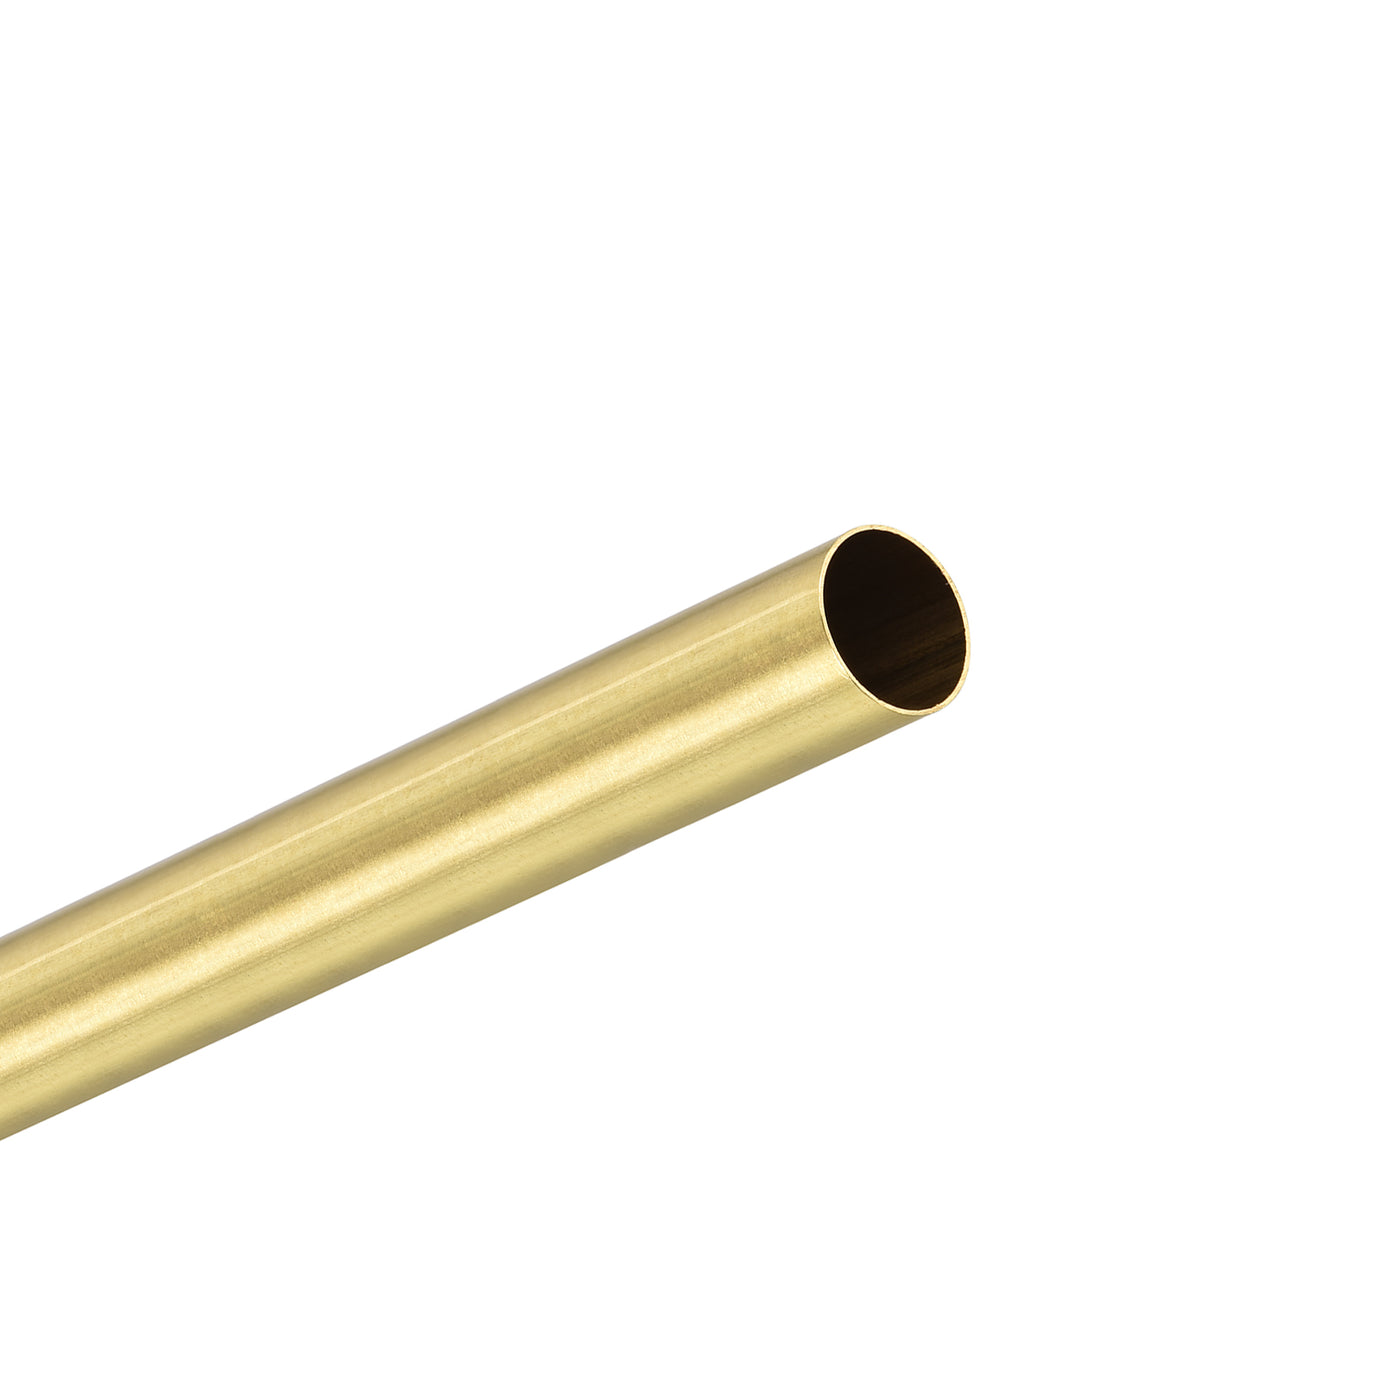 Uxcell Uxcell Brass Round Tube 1.2mm OD 0.25mm Wall Thickness 300mm Length Pipe Tubing 5 Pcs